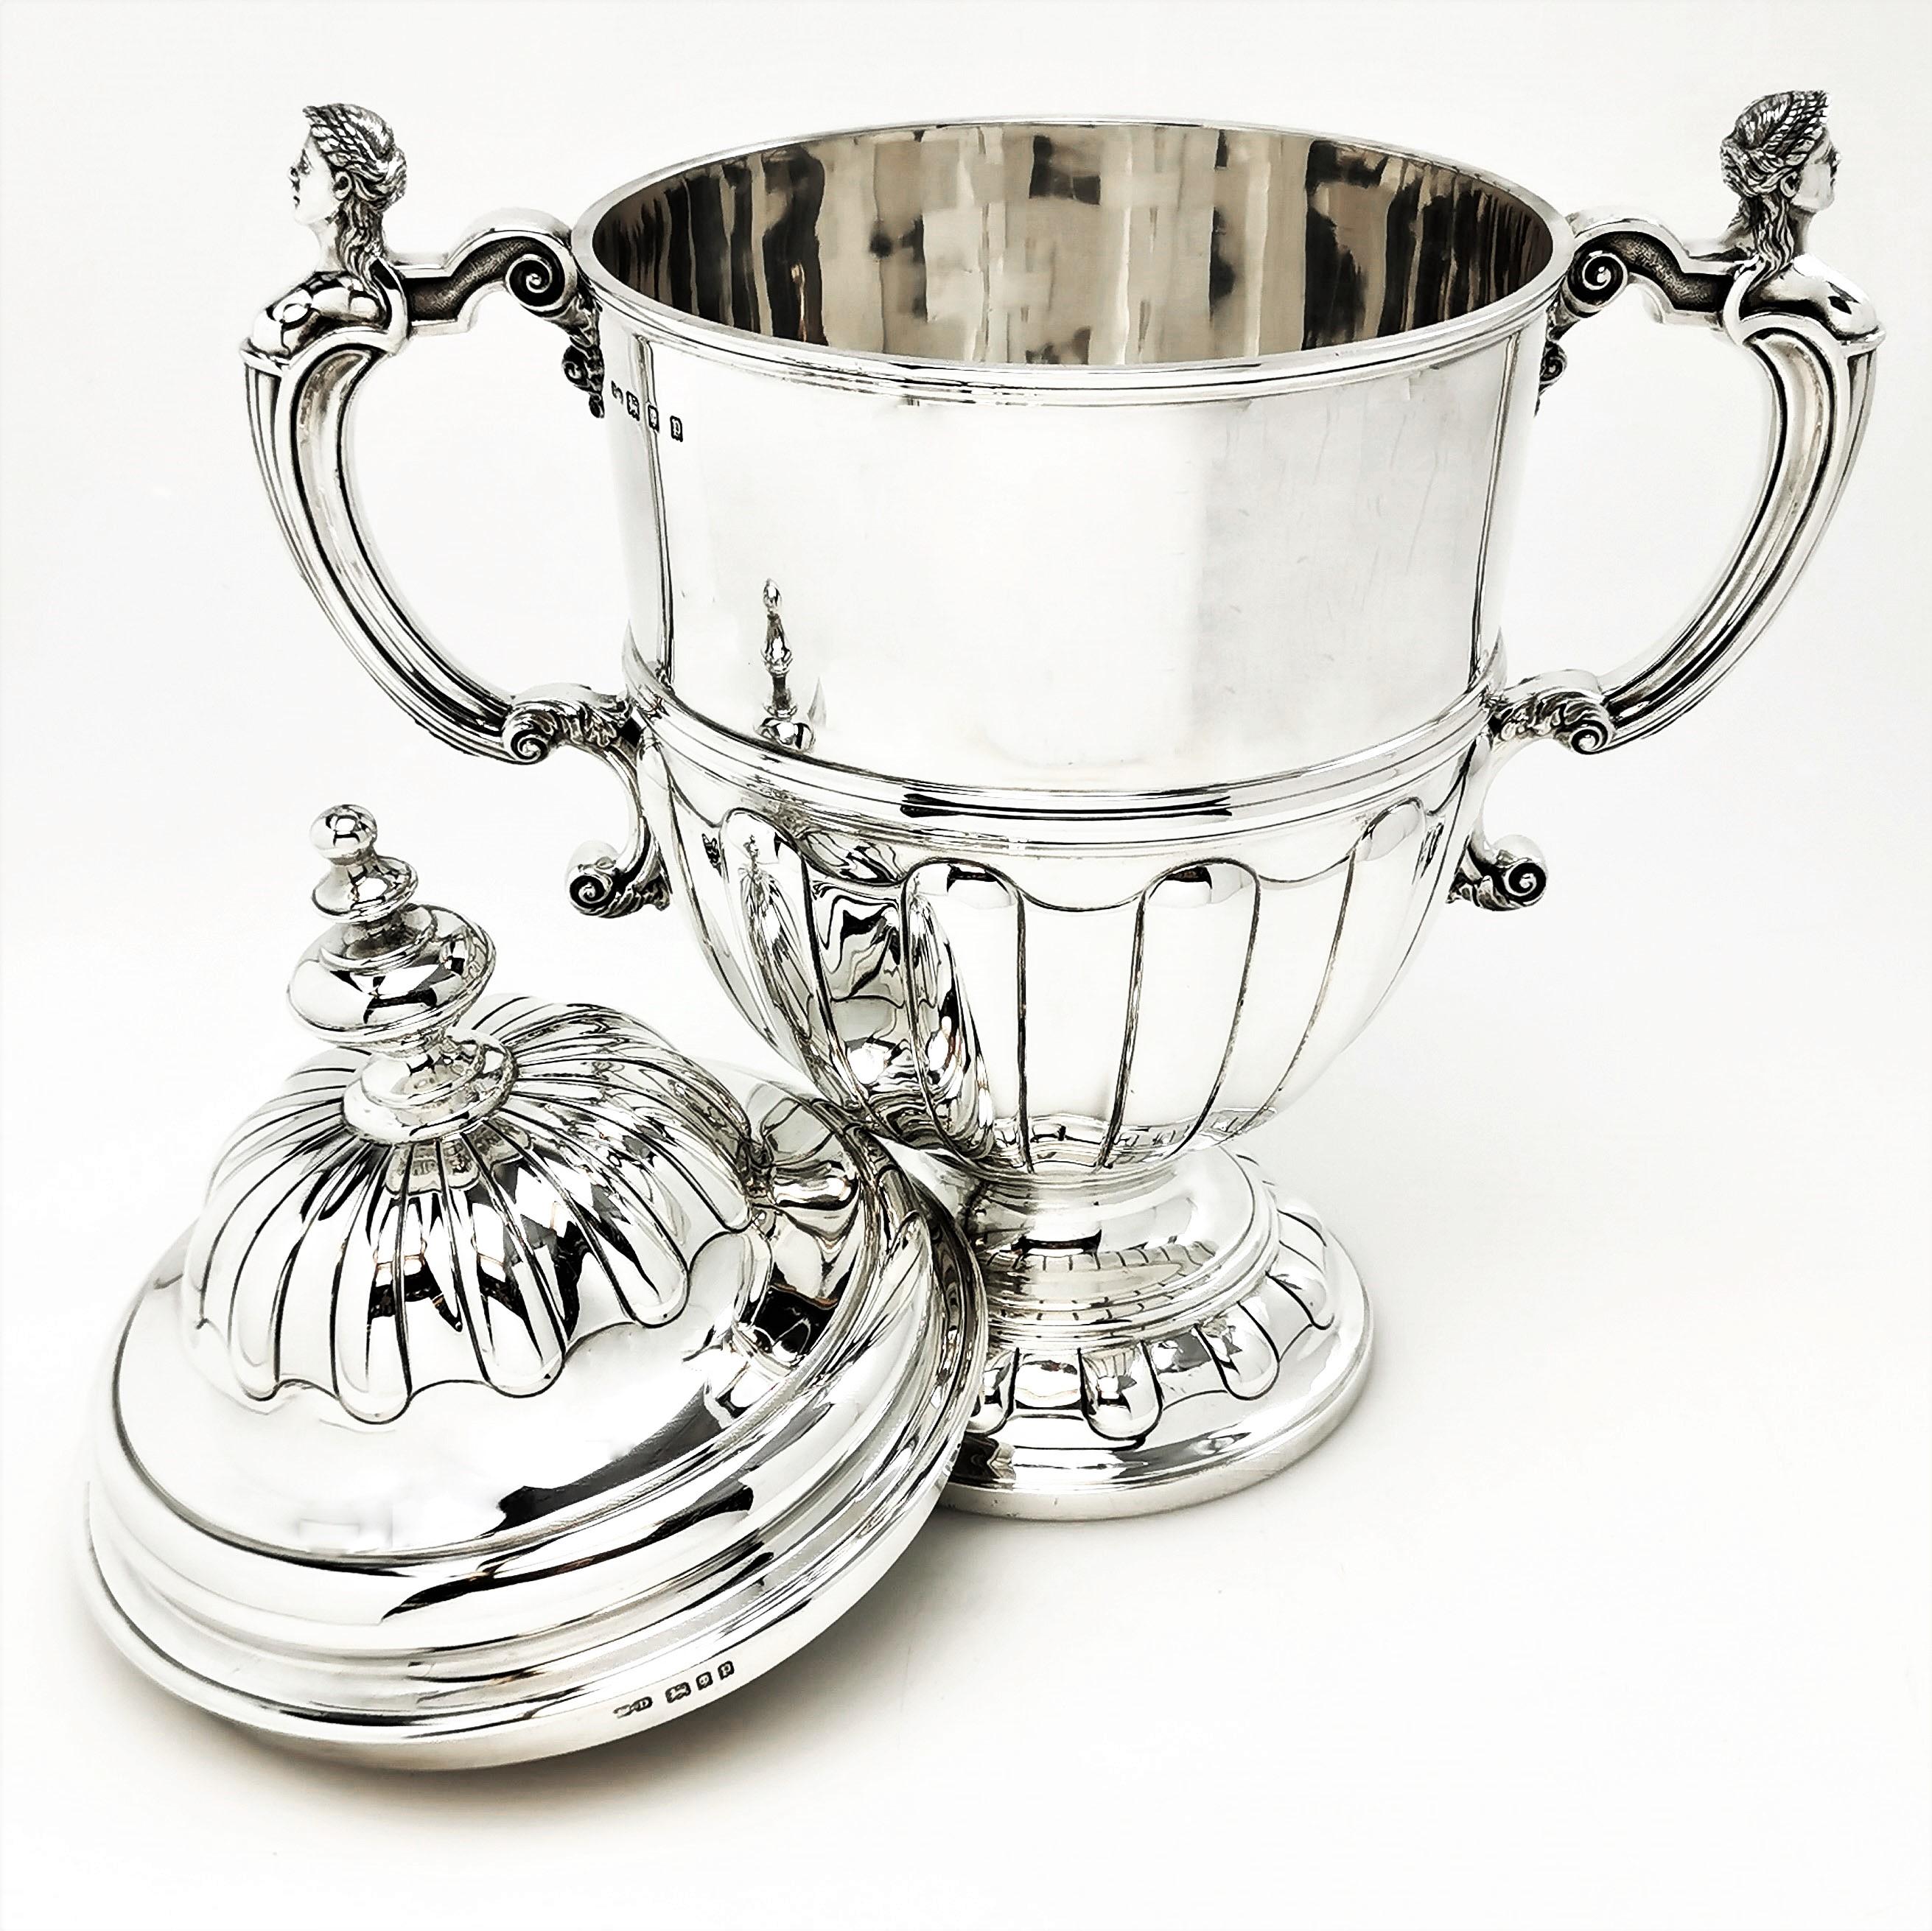 20th Century Large Sterling Silver Trophy Lidded Cup and Cover 1930 Champagne Cooler